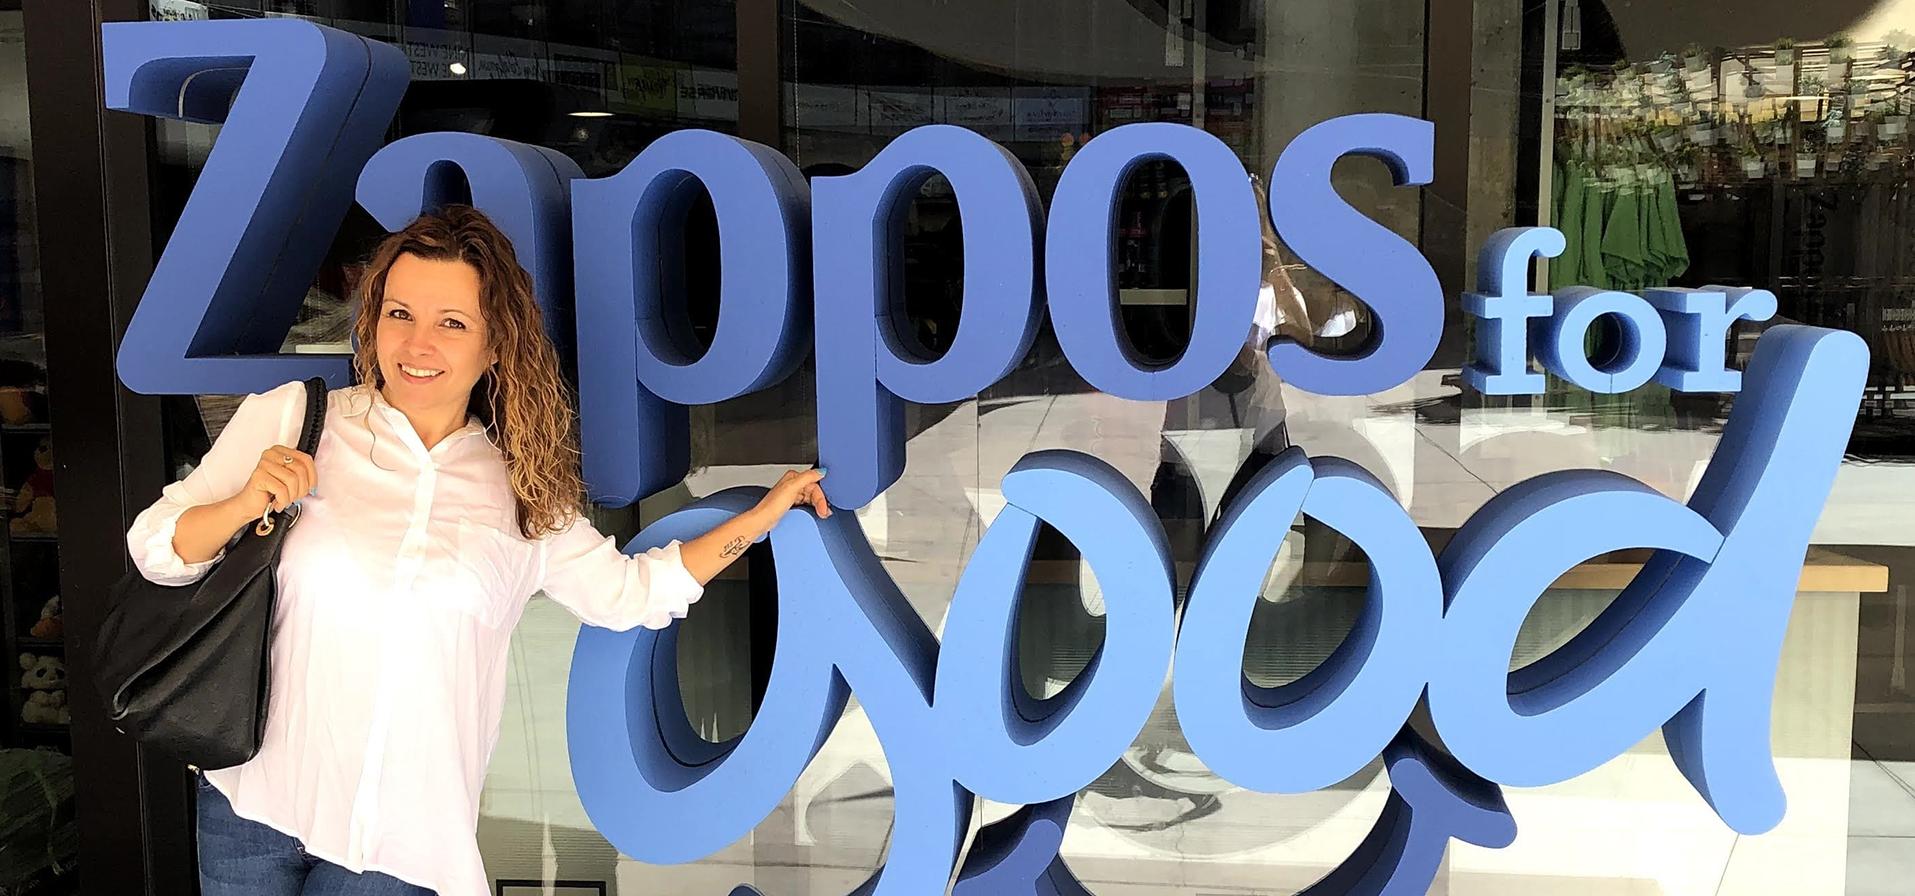 Zappos for good